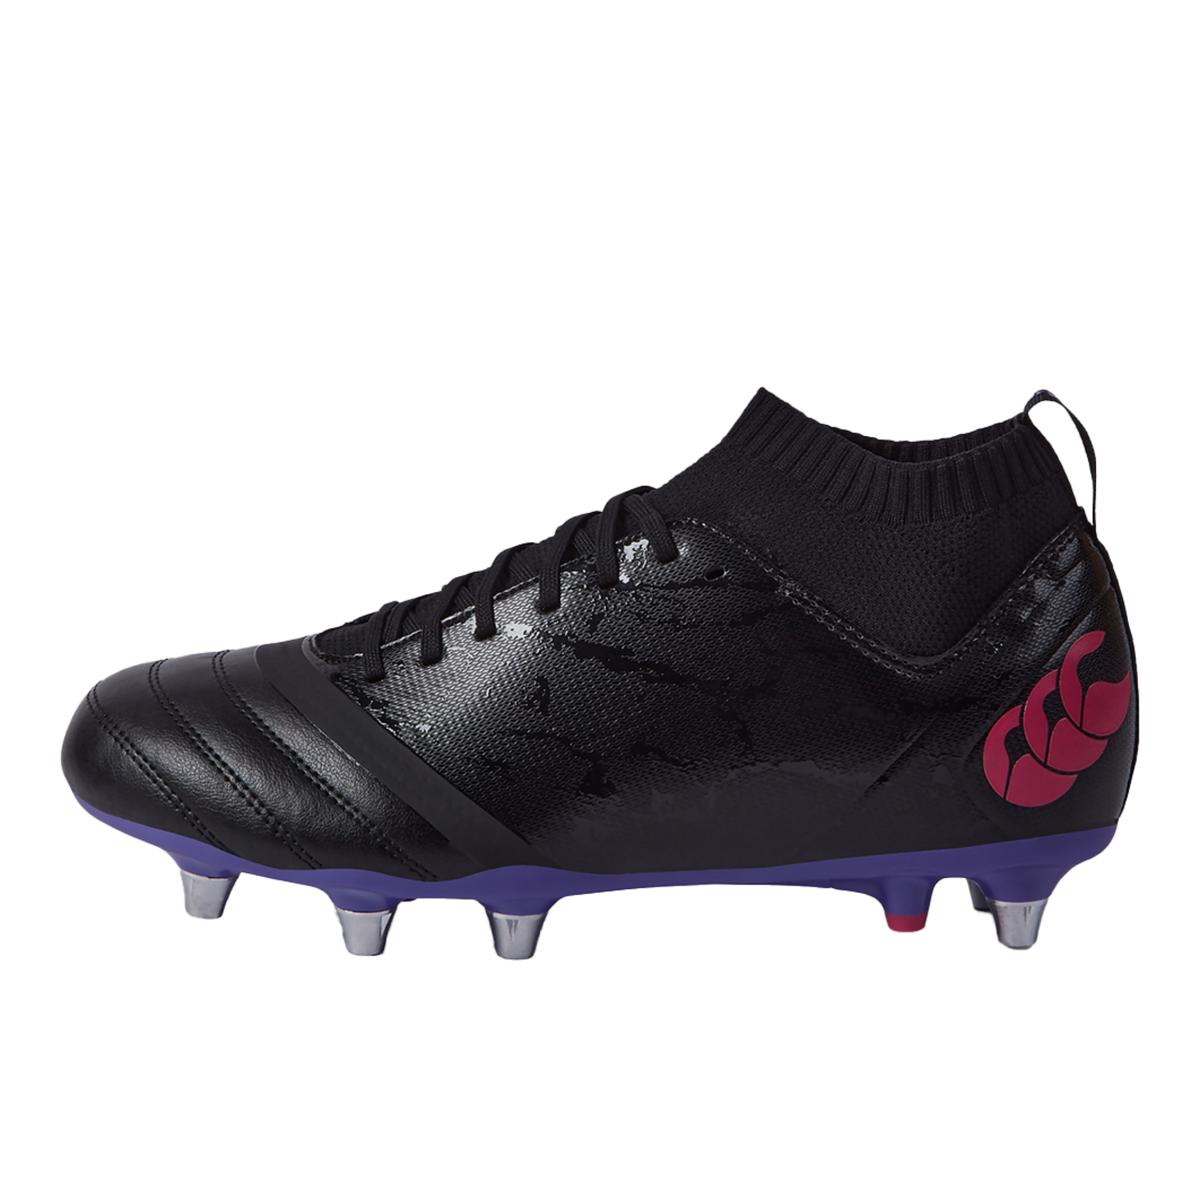 Canterbury Stampede Pro SG Rugby Boots a High-Performance Durable CCC Rugby Cleat Black/Purple Available in Unisex Sizing 6-16